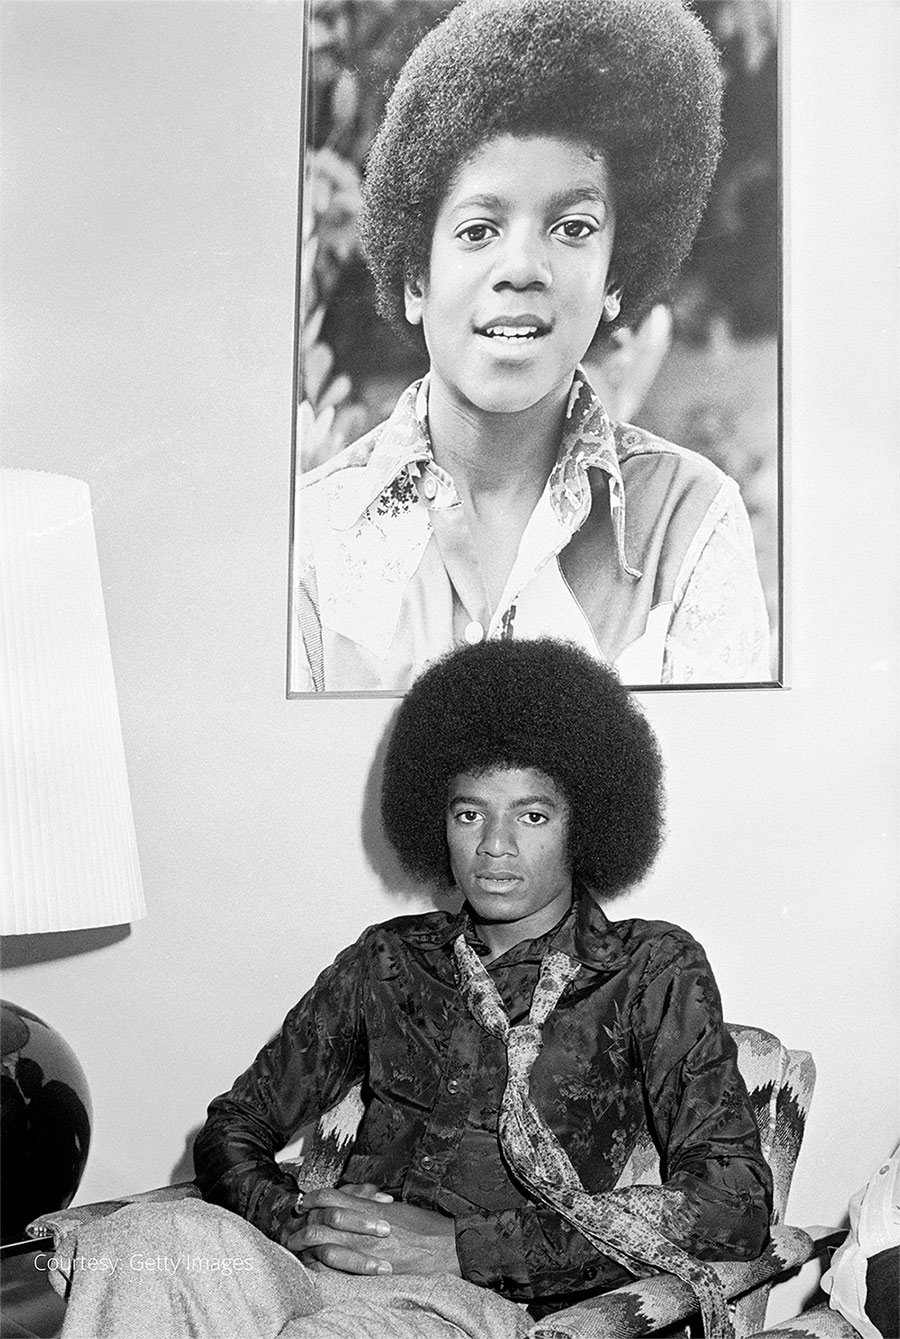 Michael Jackson poses beneath a photograph of his younger self in the 1970s.